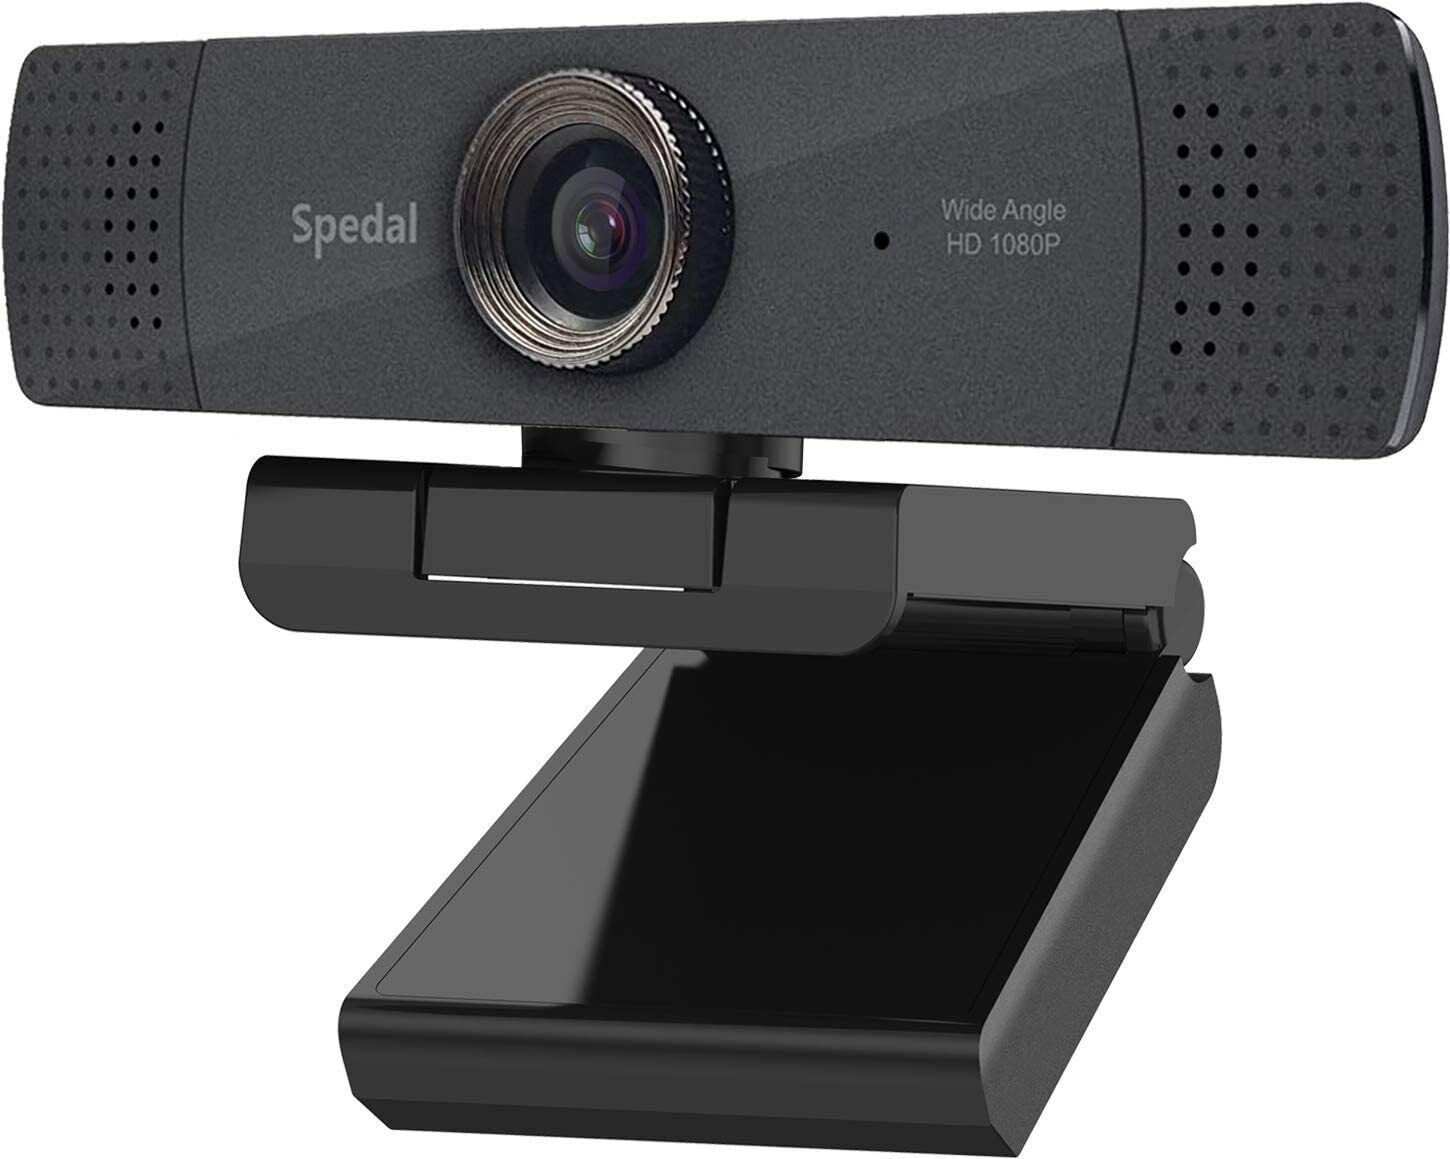 Spedal Stream Webcam FHD 1080P Live Streaming Online Teaching And More Plug/Play